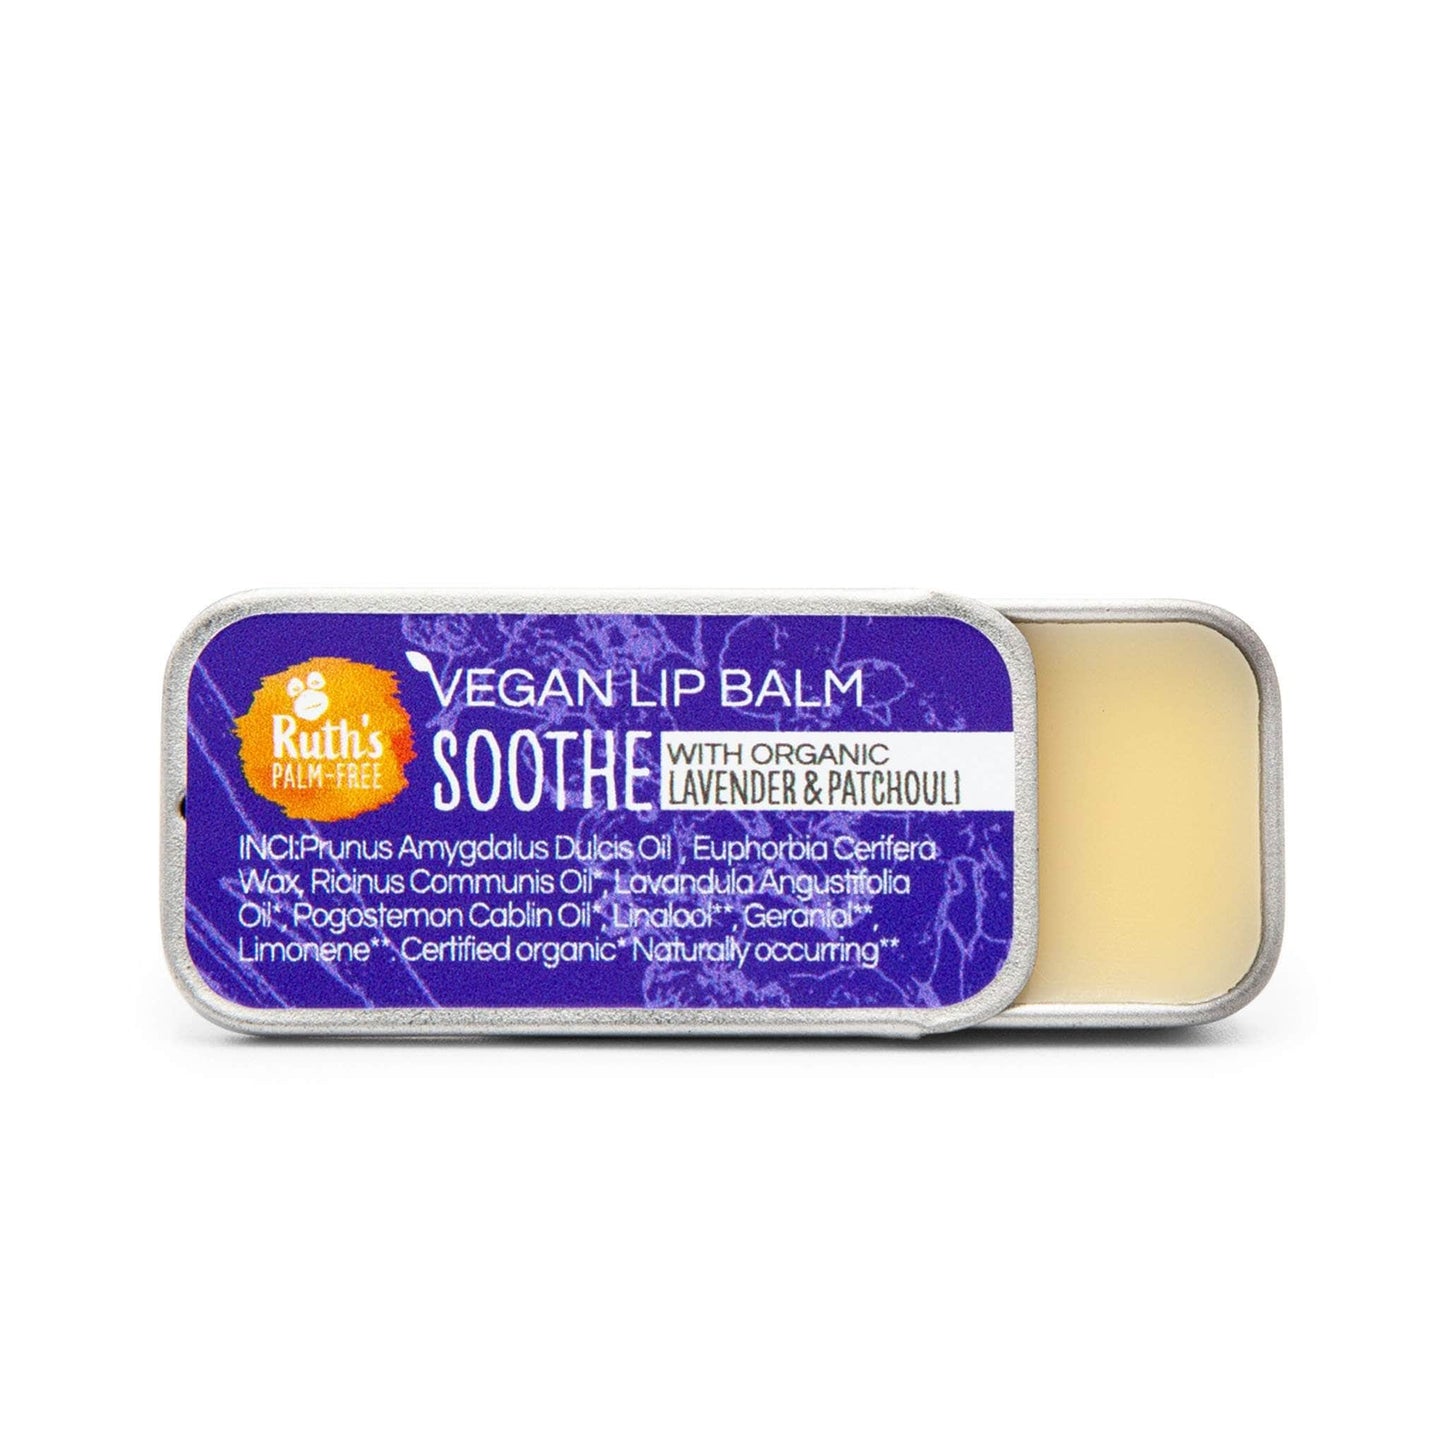 Ruth's Palm Free Skincare Soothe - Vegan - Org Lavender & Patchouli Ruth's Palm Free Vegan Lip Balm - 7g